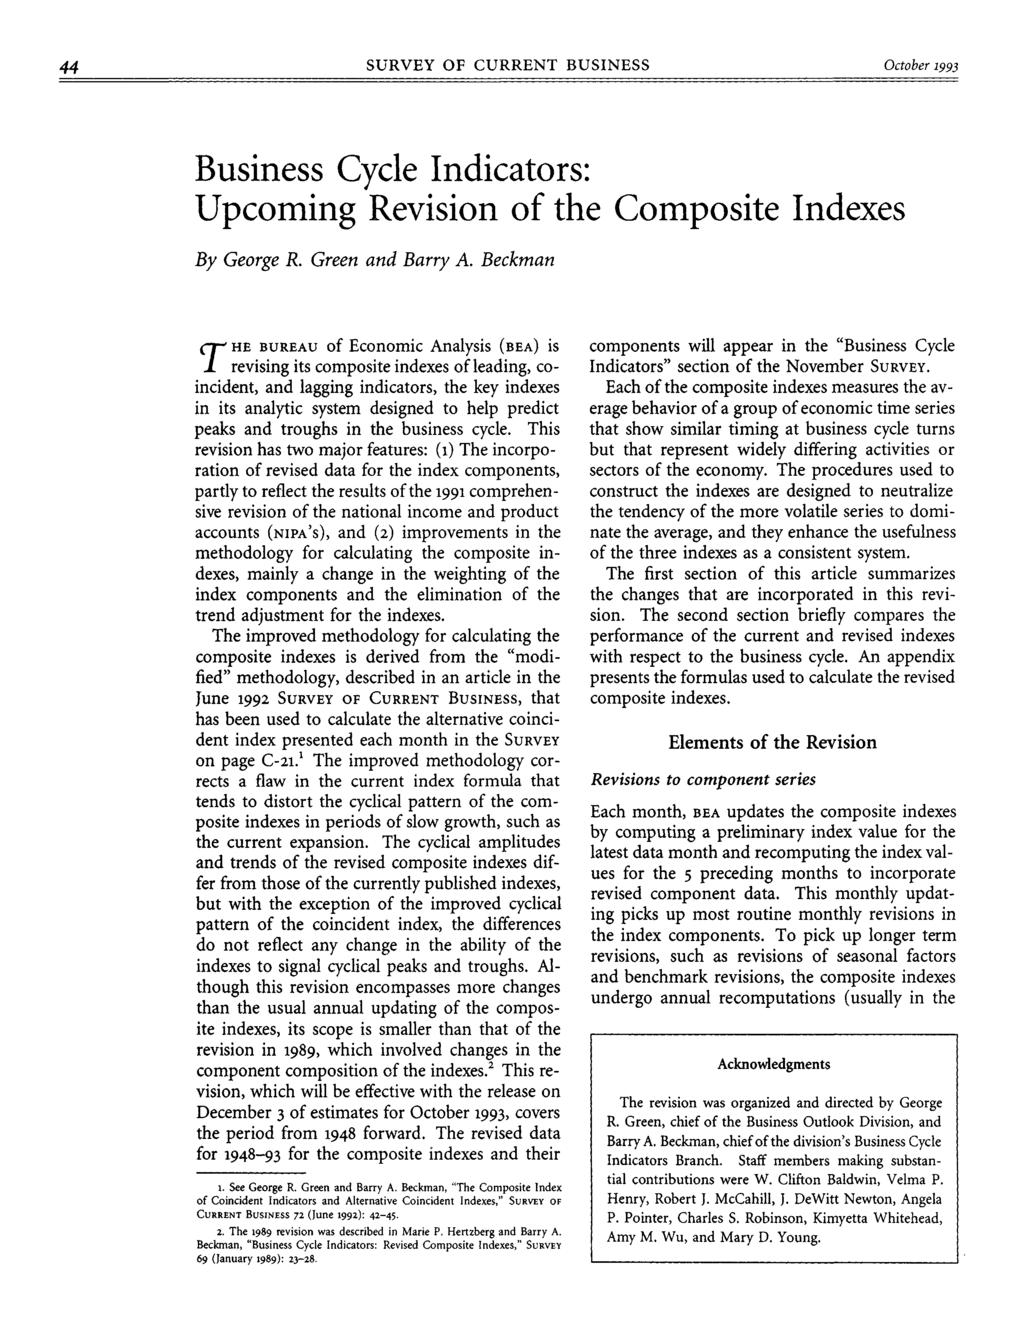 44 SURVEY OF CURRENT BUSINESS Business Cycle Indicators: Upcoming Revision of the Composite Indexes By George R. Green and Barry A.